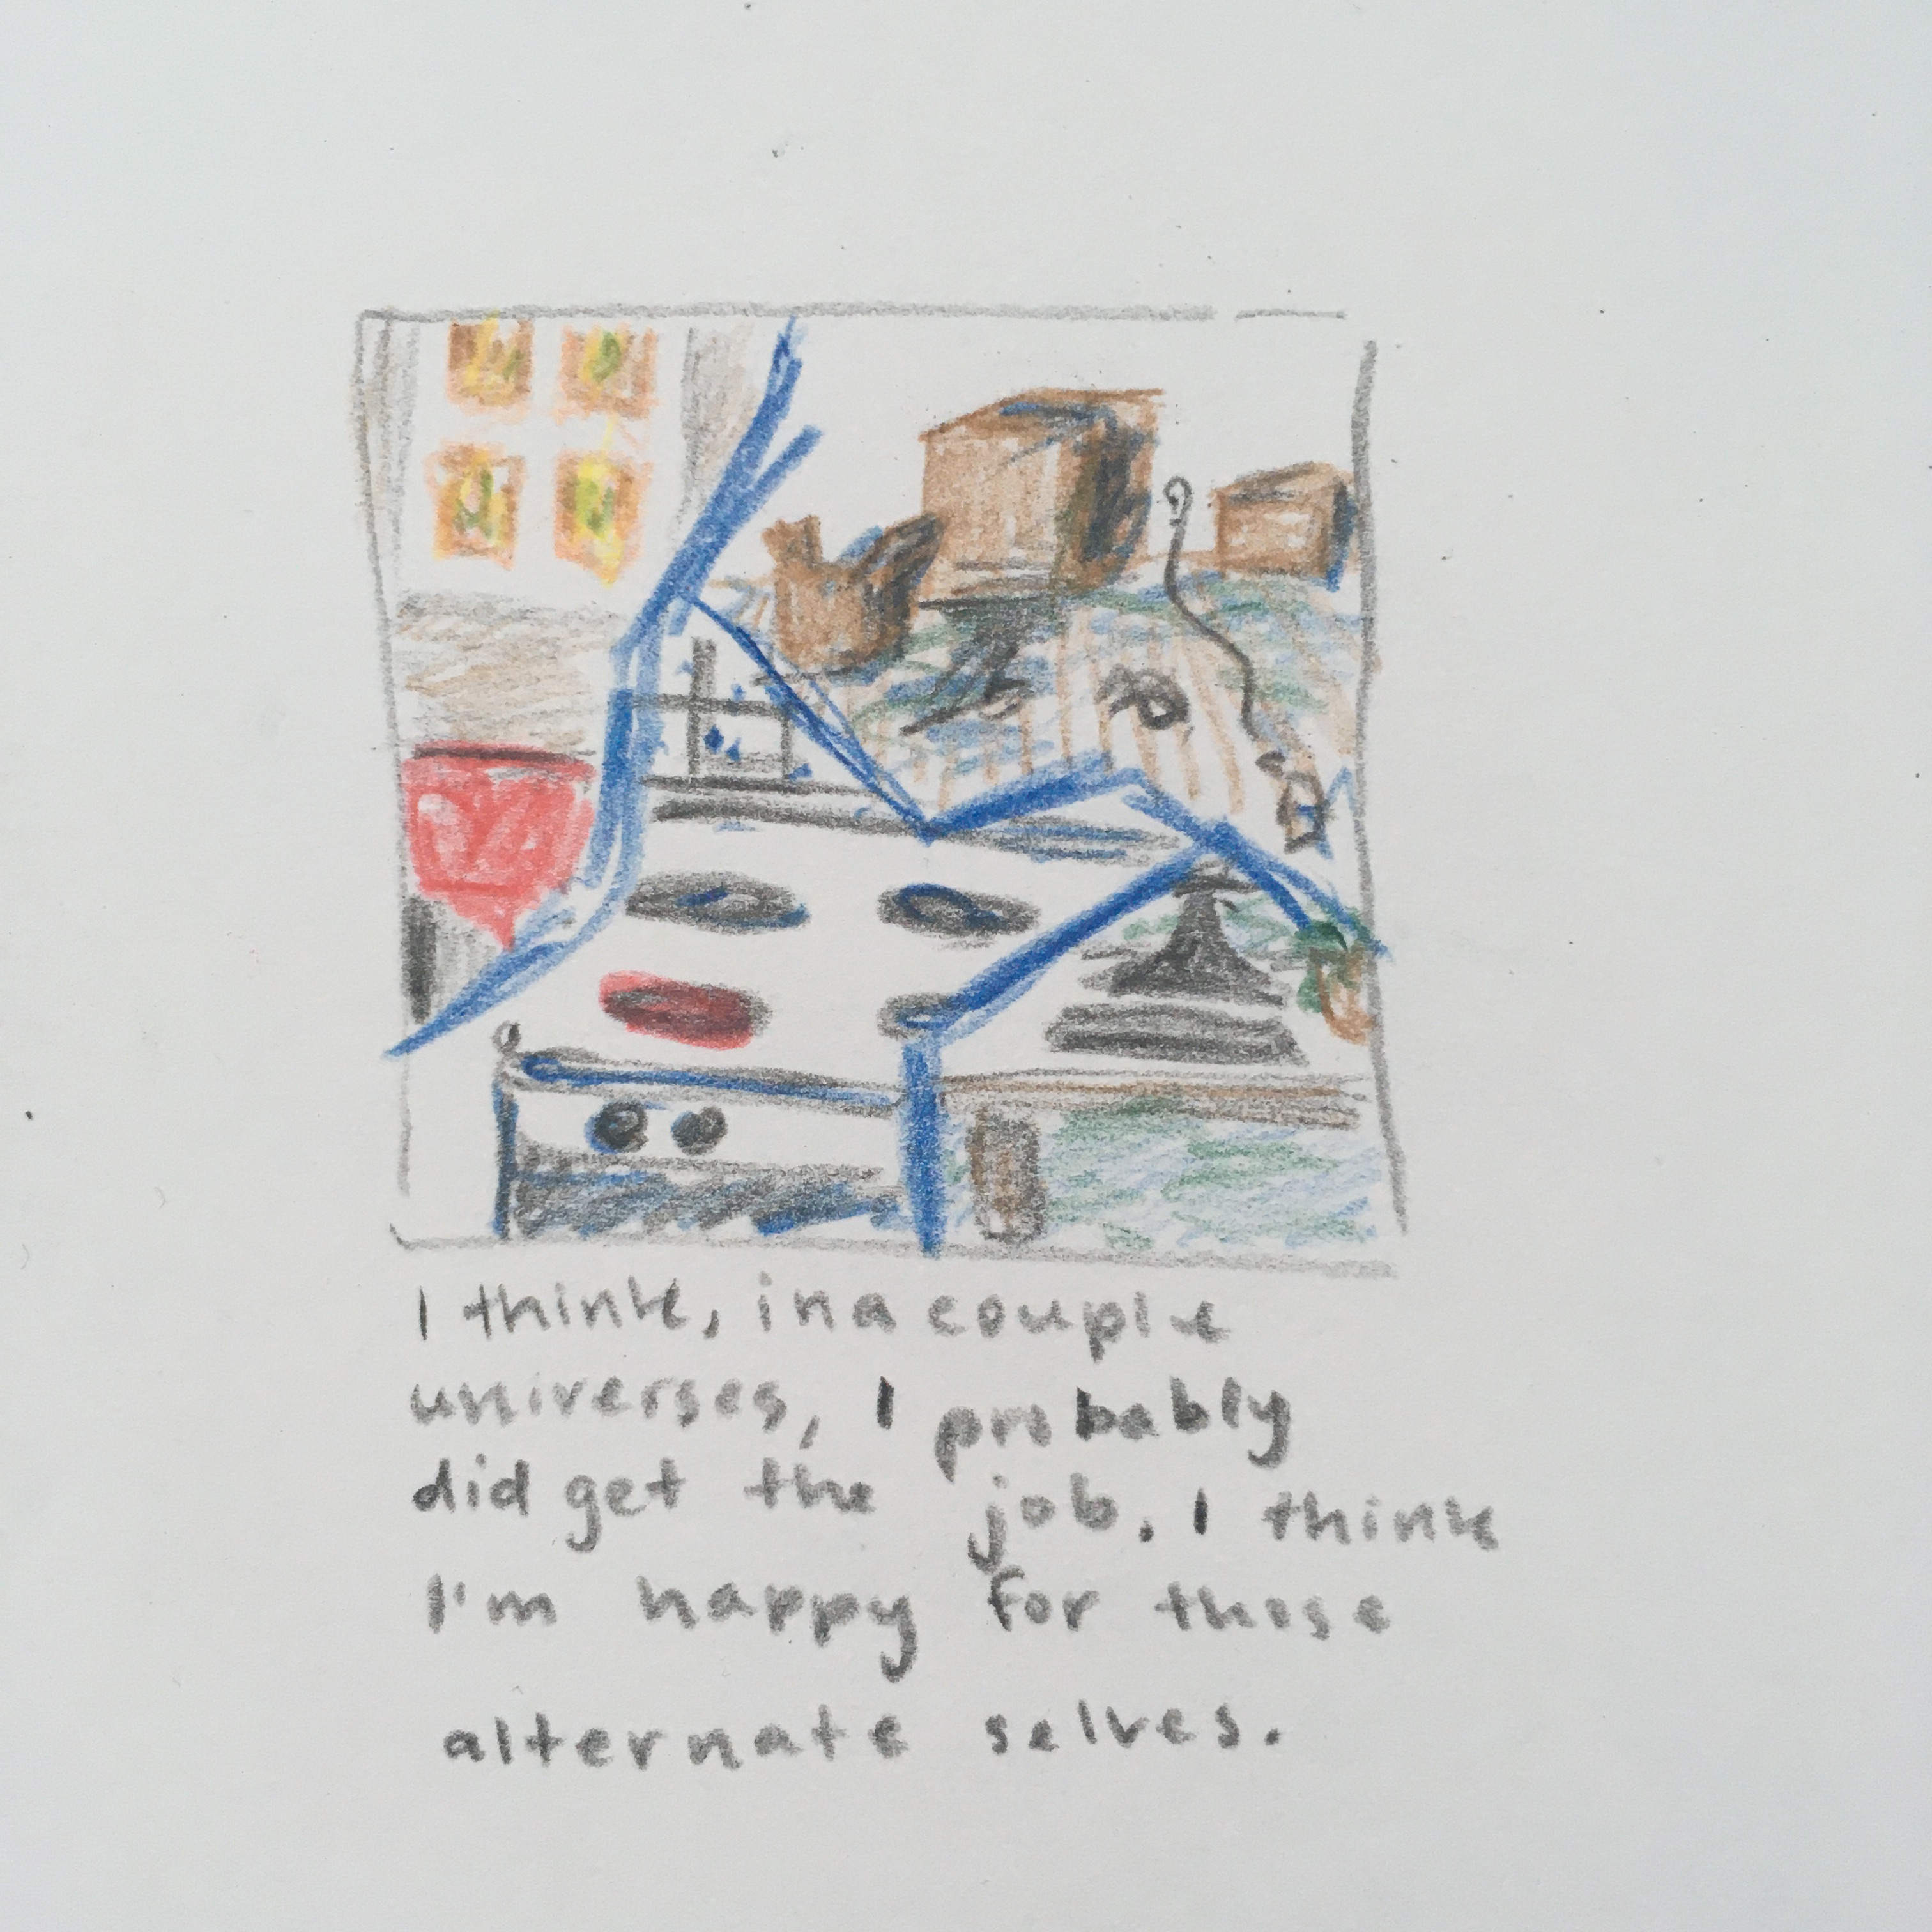 a drawing showing 4 scenes, split by blue cracks: a window at sunset, some cardboard boxes on the floor, a stove with one burner on, part of a work desk with a small potted plant on it